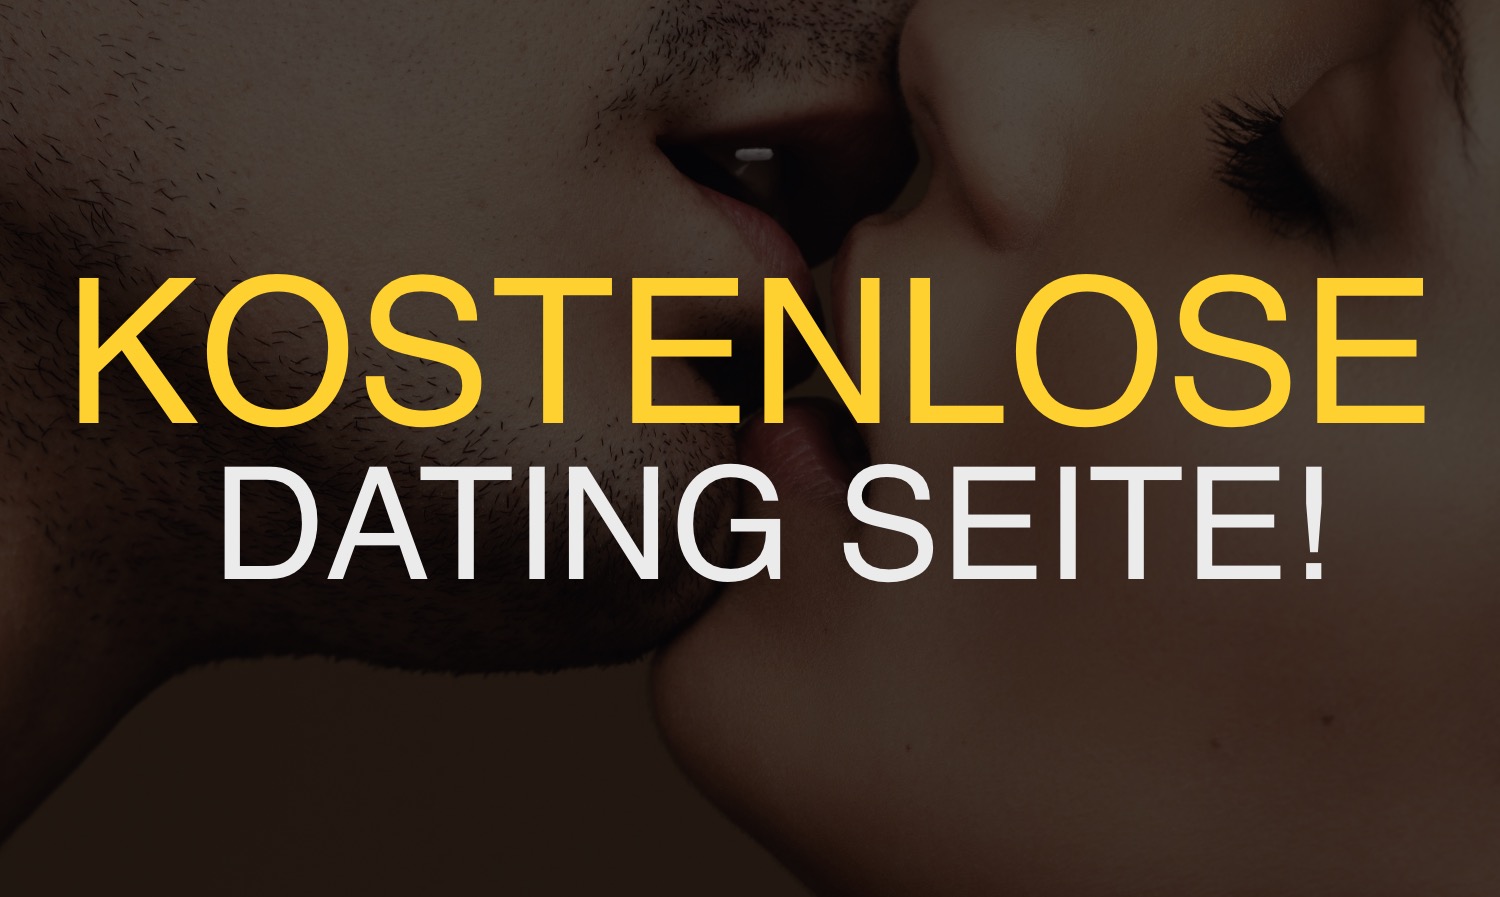 Kostenlose chats online-dating-sites